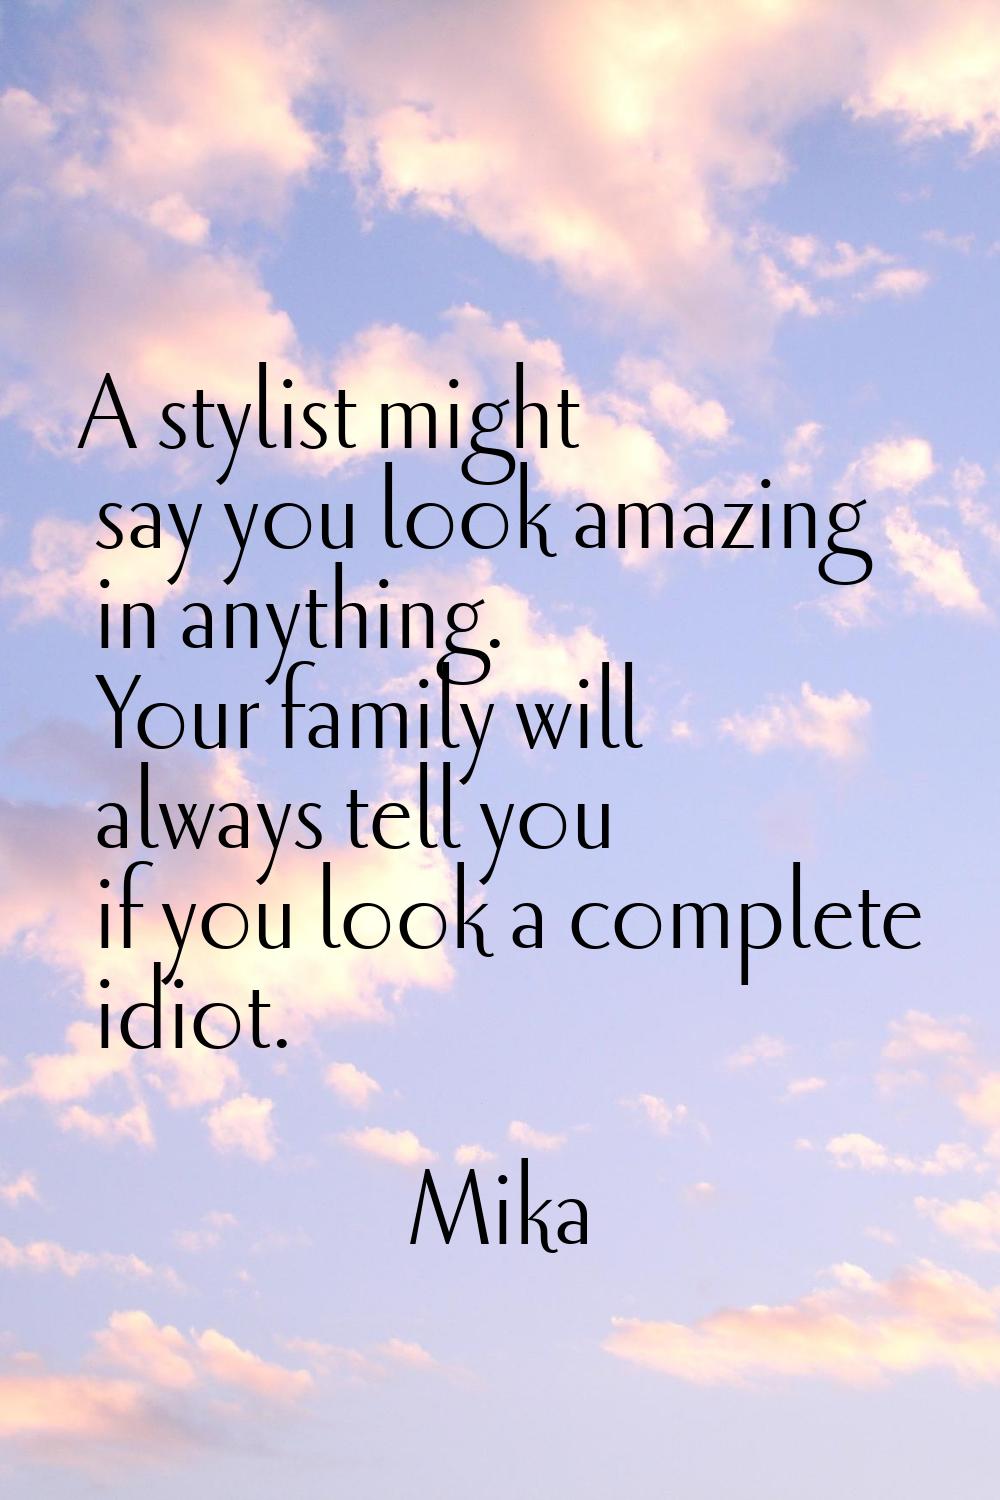 A stylist might say you look amazing in anything. Your family will always tell you if you look a co